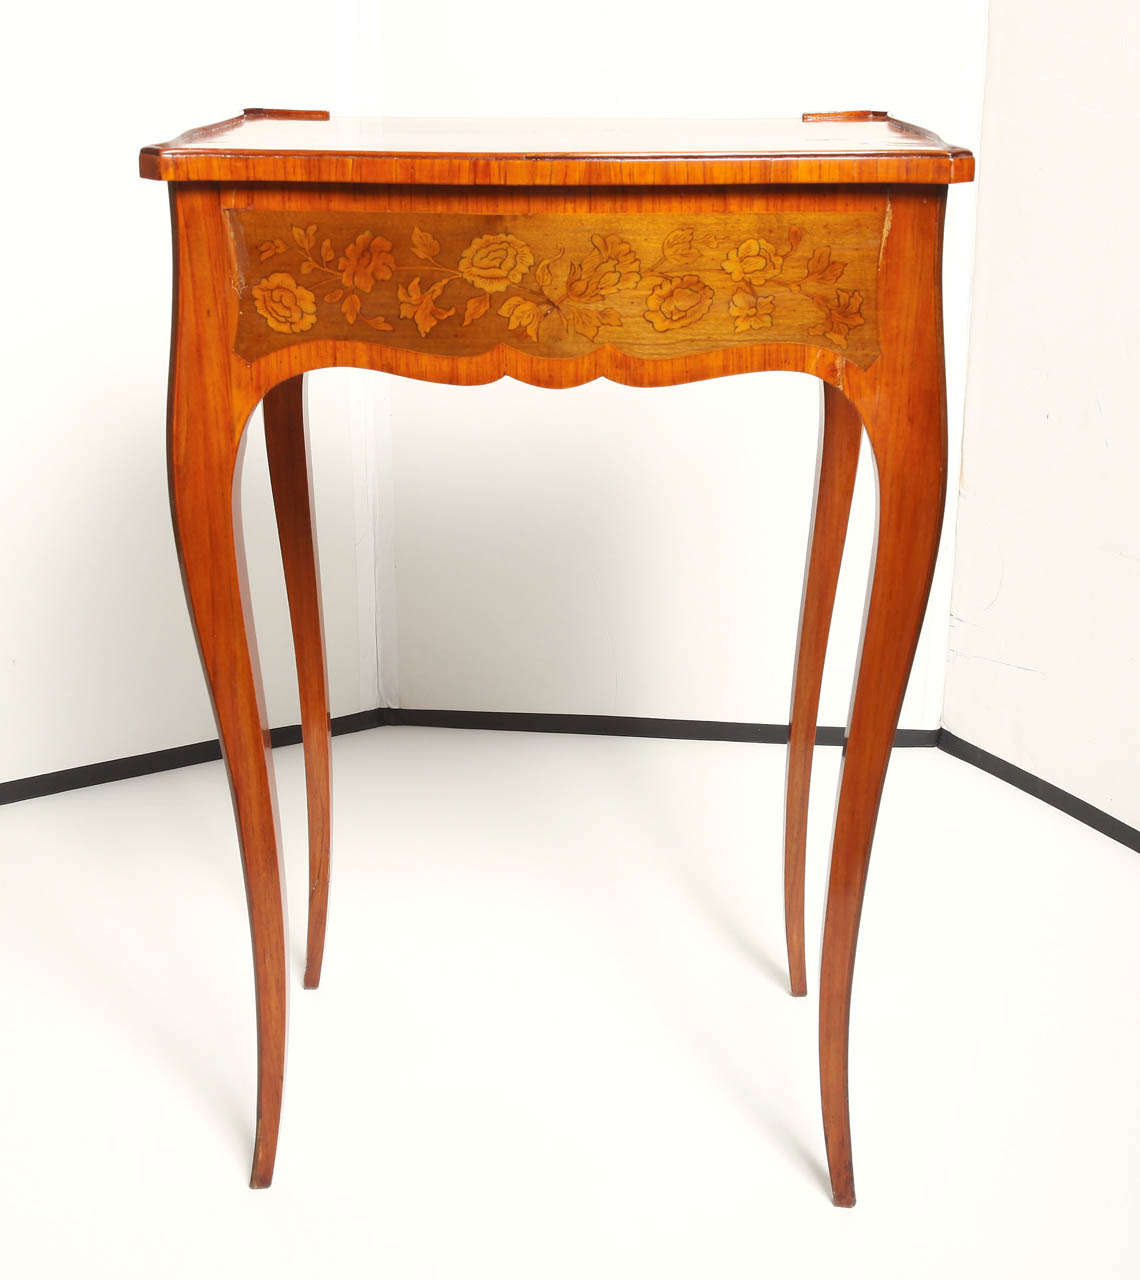 19th c French acajou mahogany side table with tulipwood inlay and a single drawer